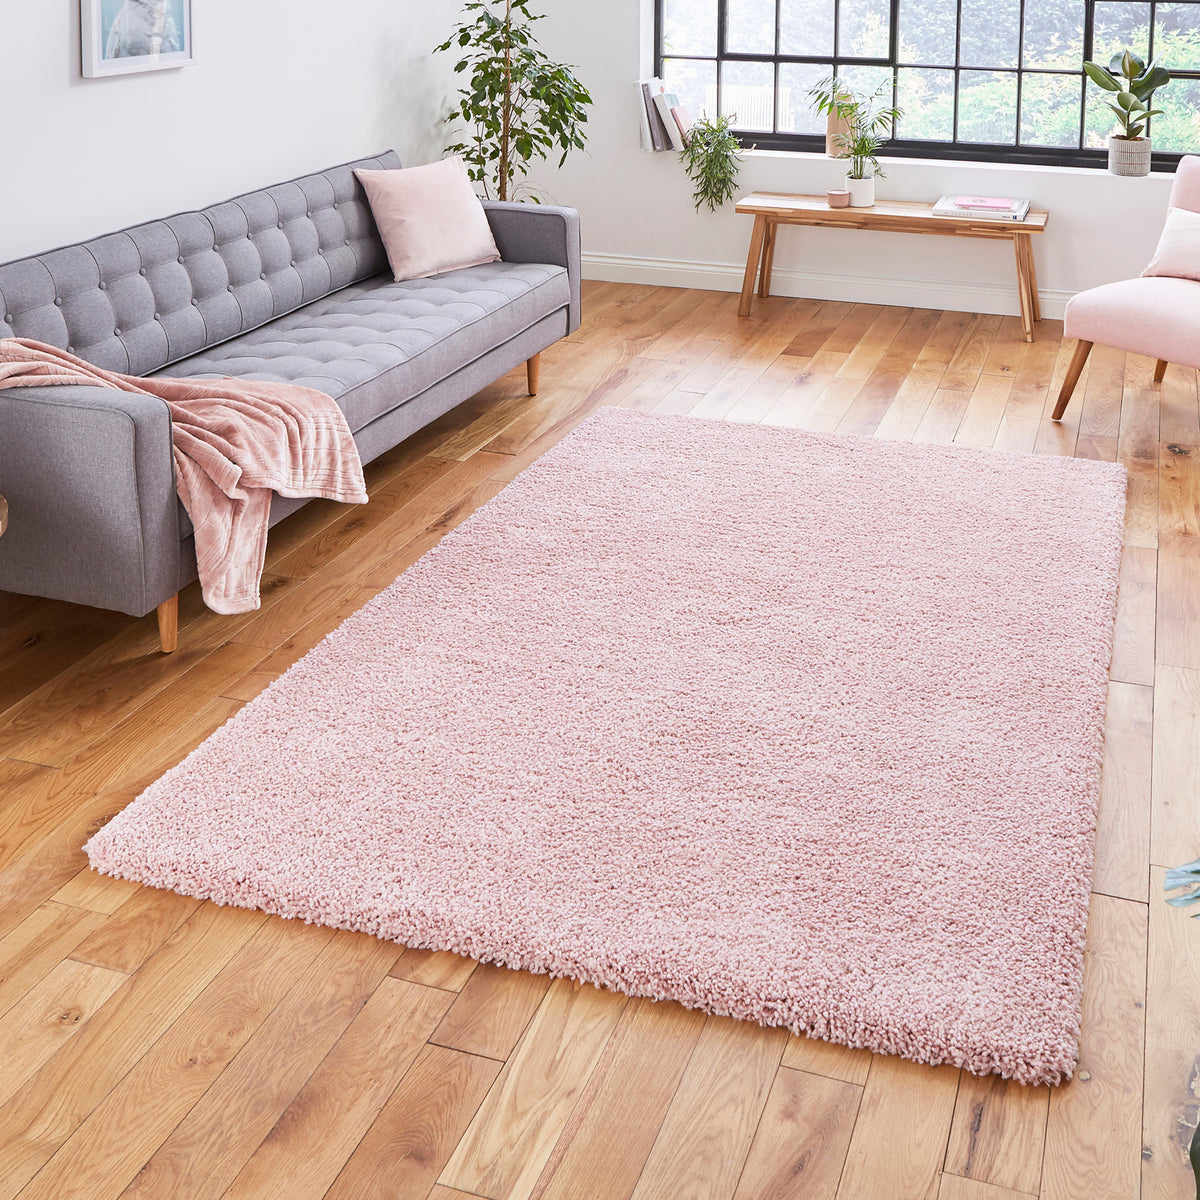 Roswell Pastel Pink Stain Resistant Shaggy Rug for living room